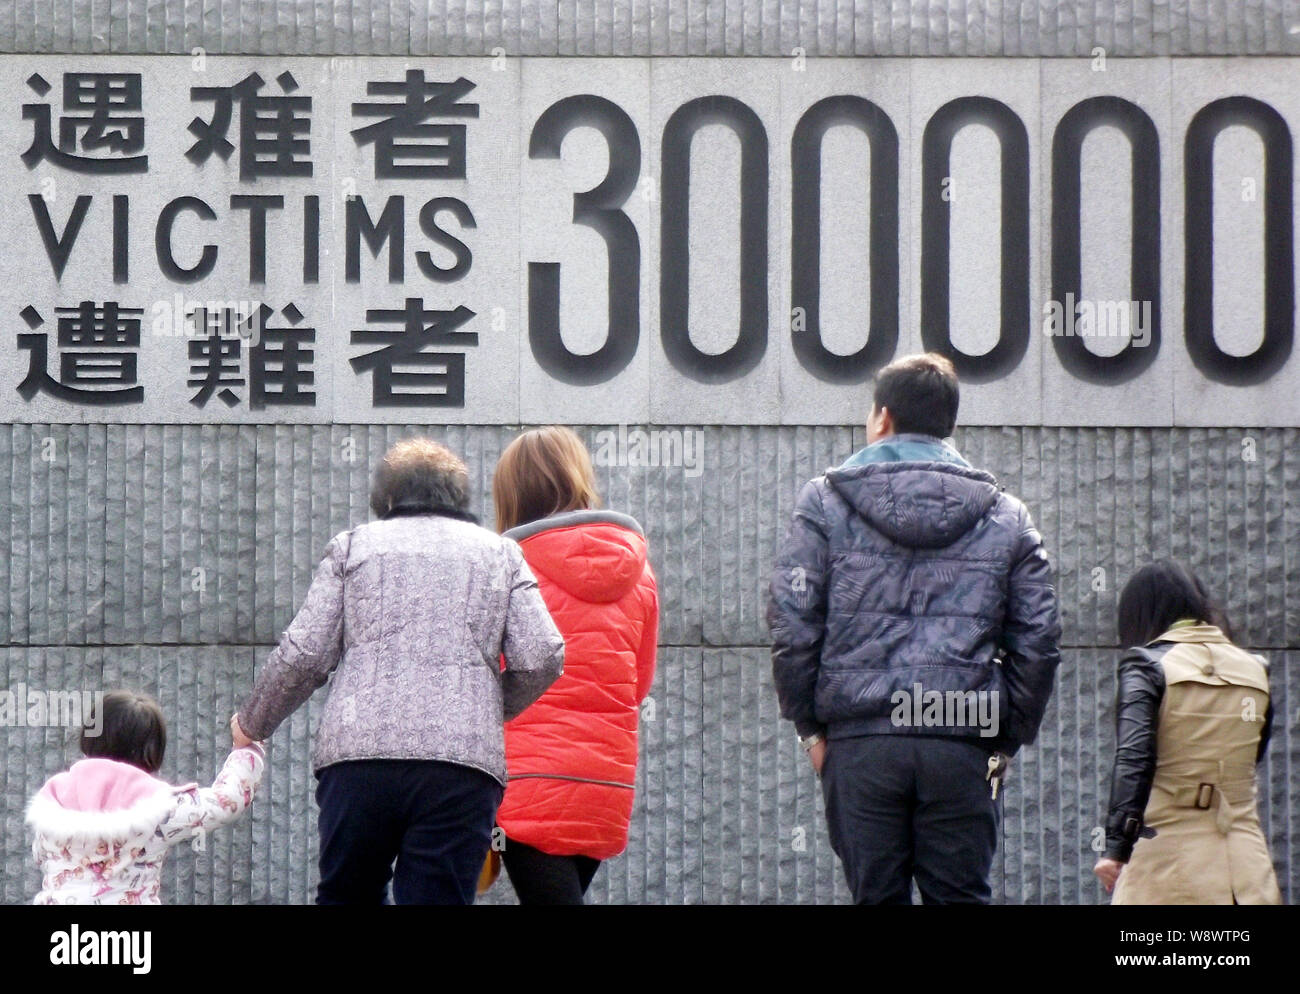 --FILE--Visitors walk past a sign showing the number of victims of the Nanjing Massacre at the Memorial Hall of the Victims in Nanjing Massacre by Jap Stock Photo